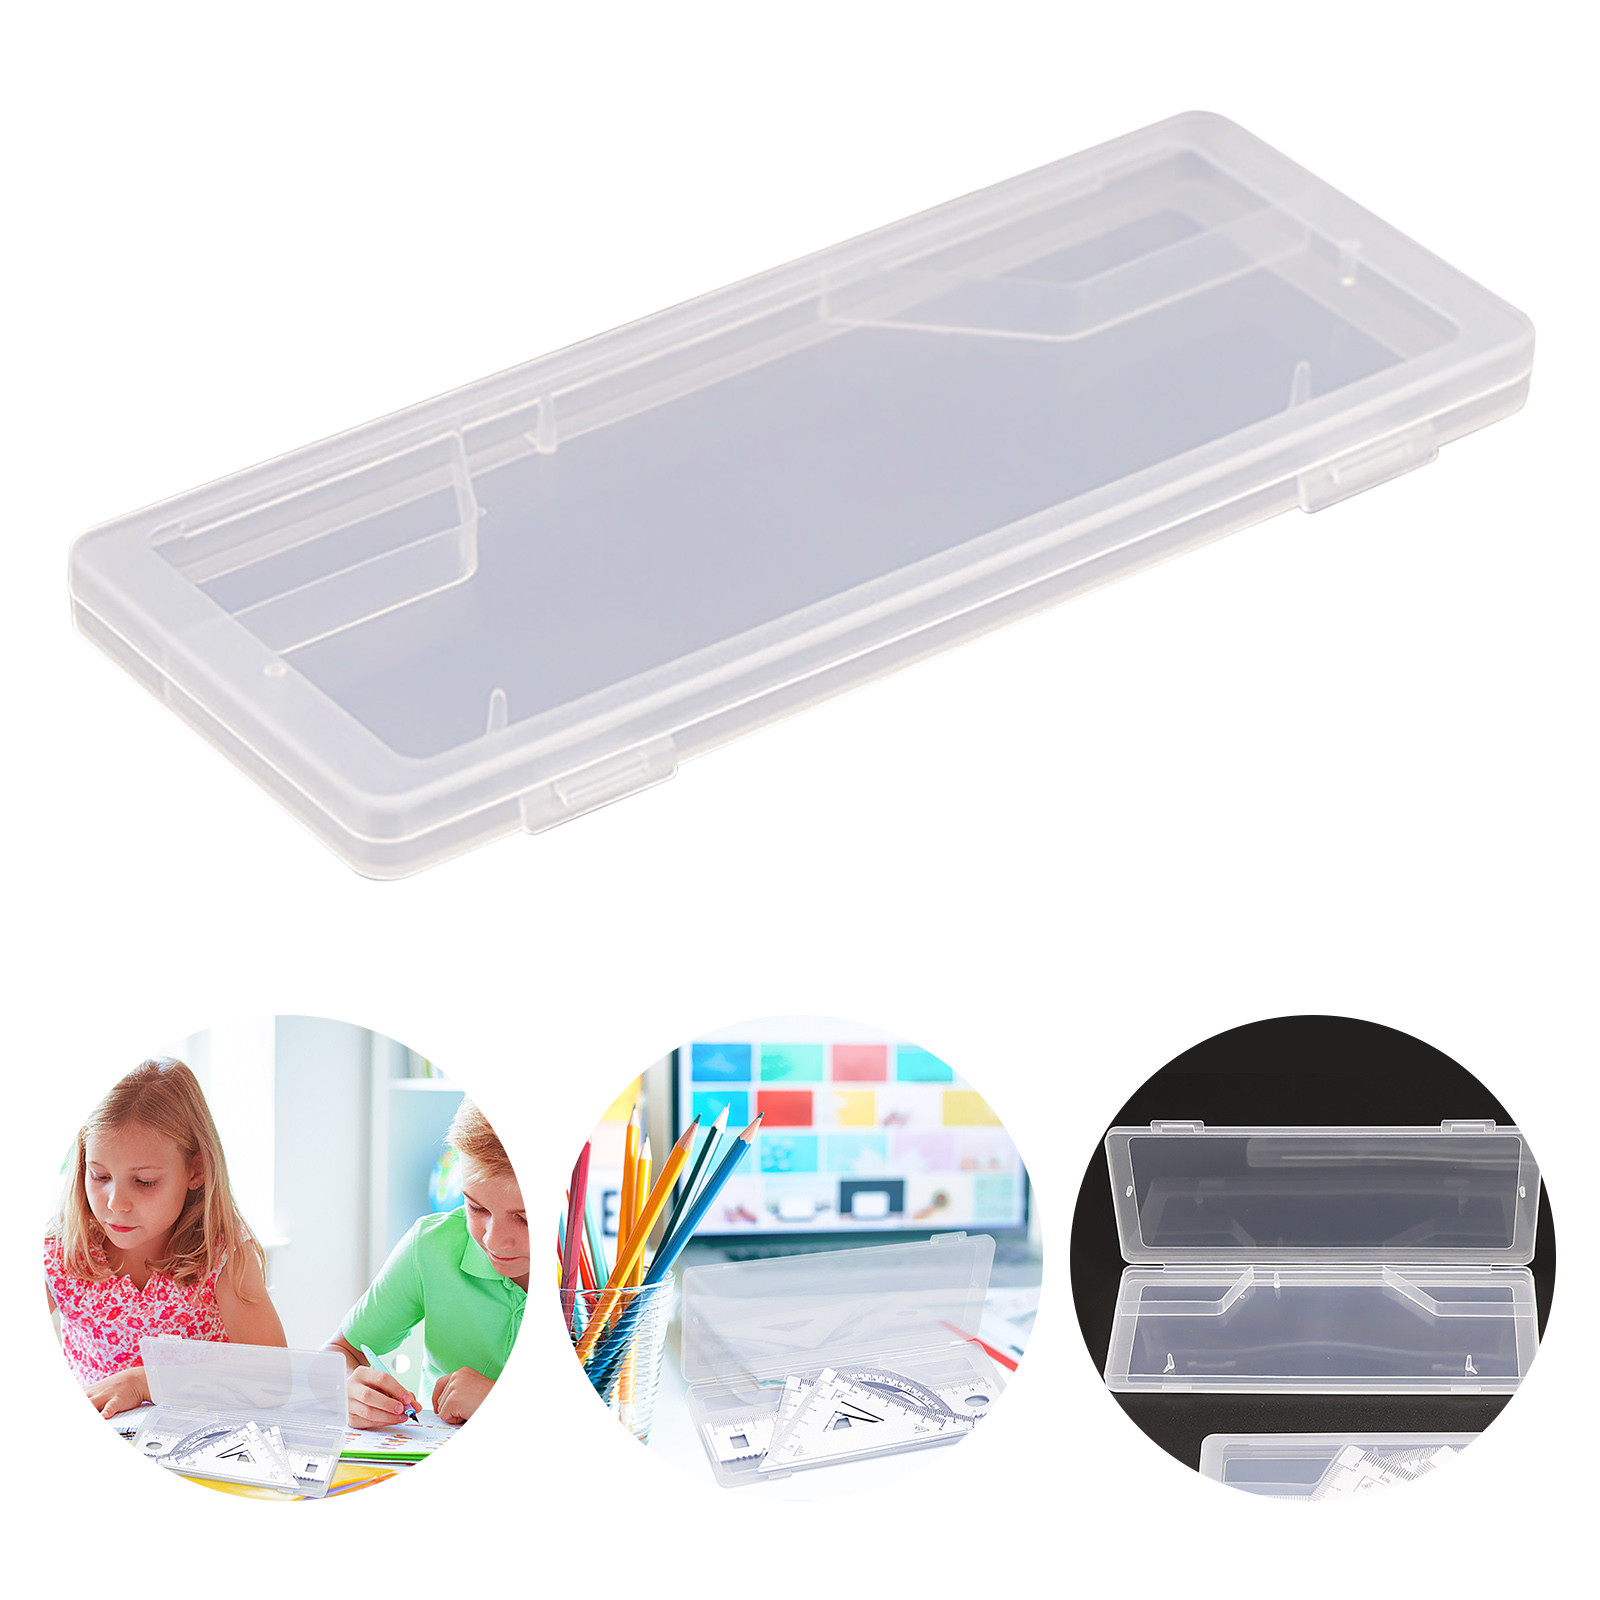 Mchoice Office School Supplies Pens Learn To Drive Straight Ruler Box Transparent Student Stationery Box Test Special Four-piece Ruler Box Pencil Case Pencil Pouch Colored Pencils - image 2 of 9